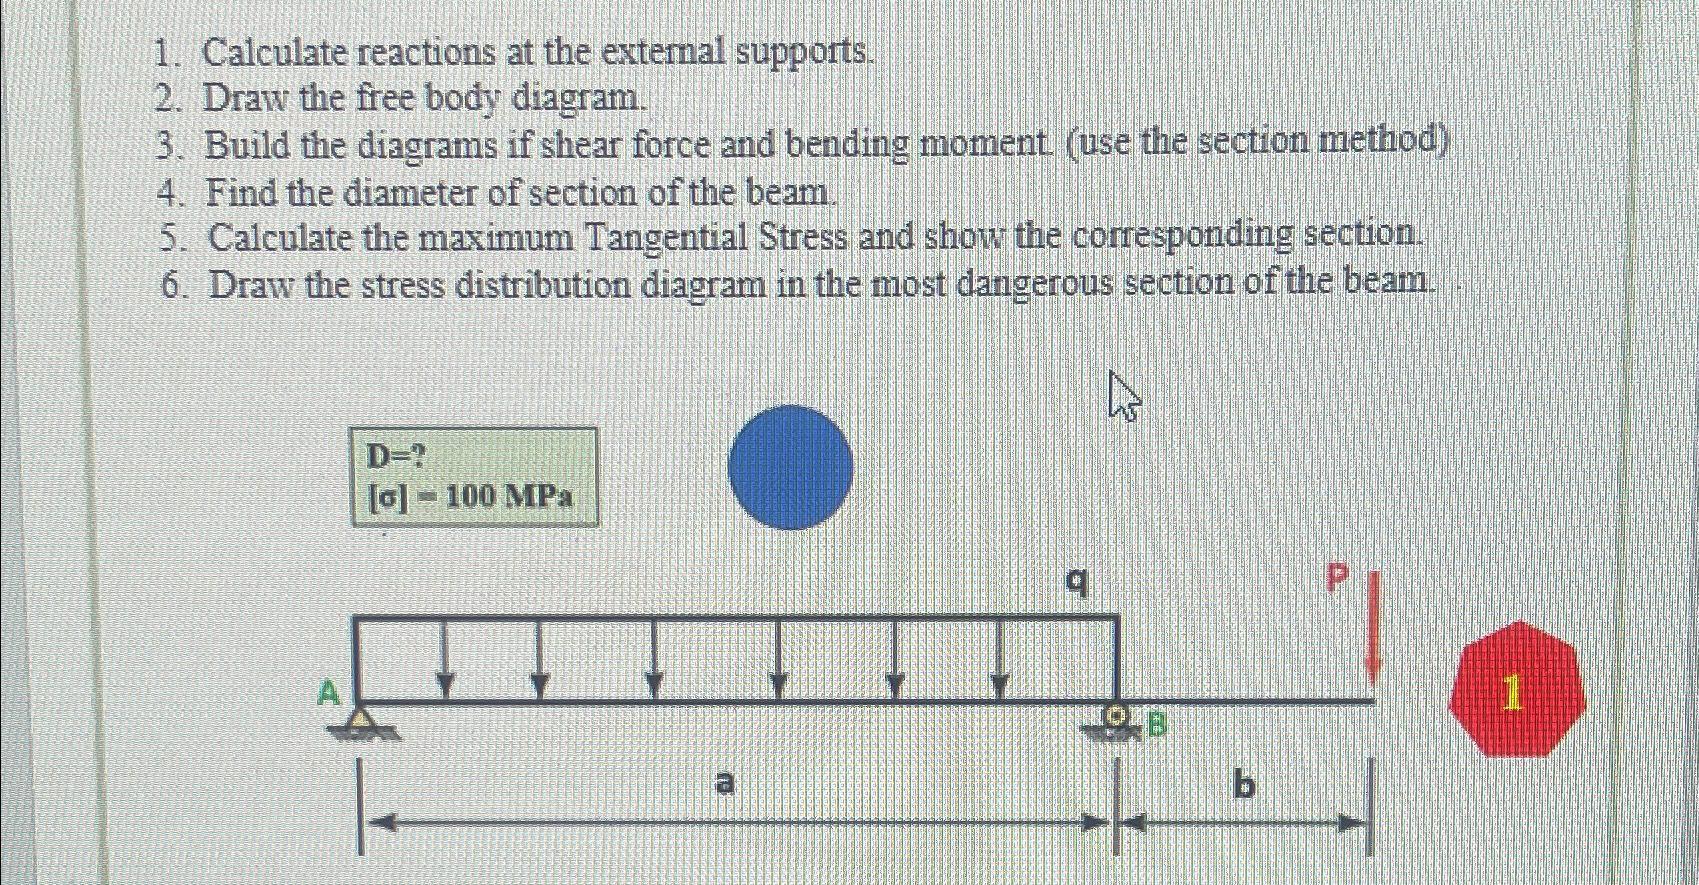 1. Calculate reactions at the external supports. 2. Draw the free body diagram. 3. Build the diagrams if